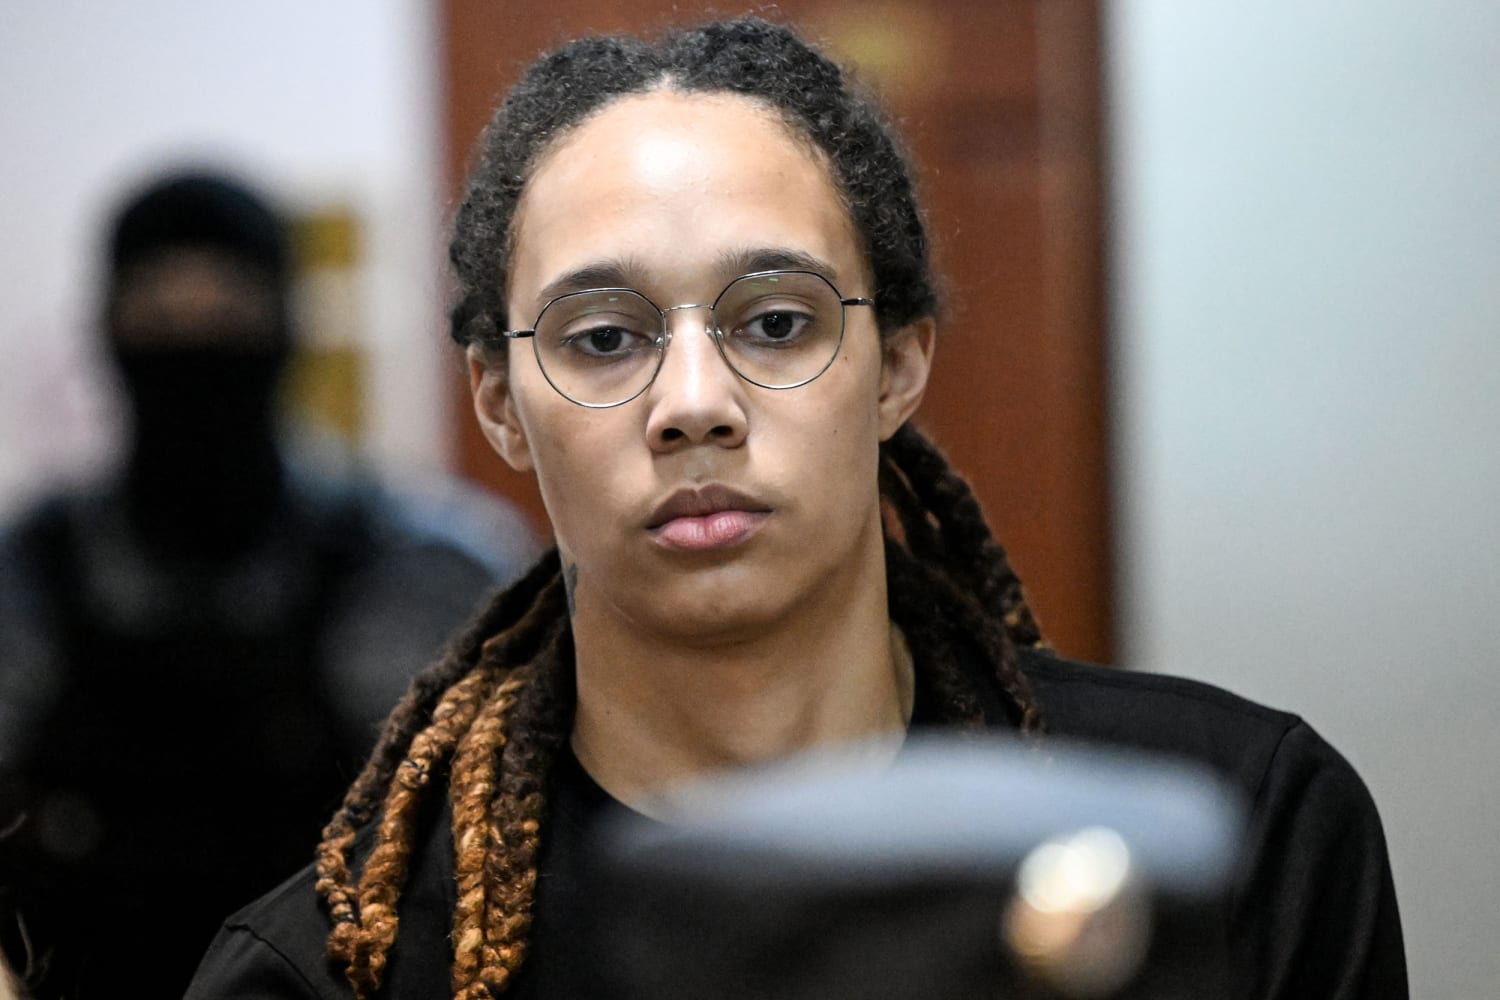 Video Shows Brittney Griner Leaving Russian Custody - The New York Times